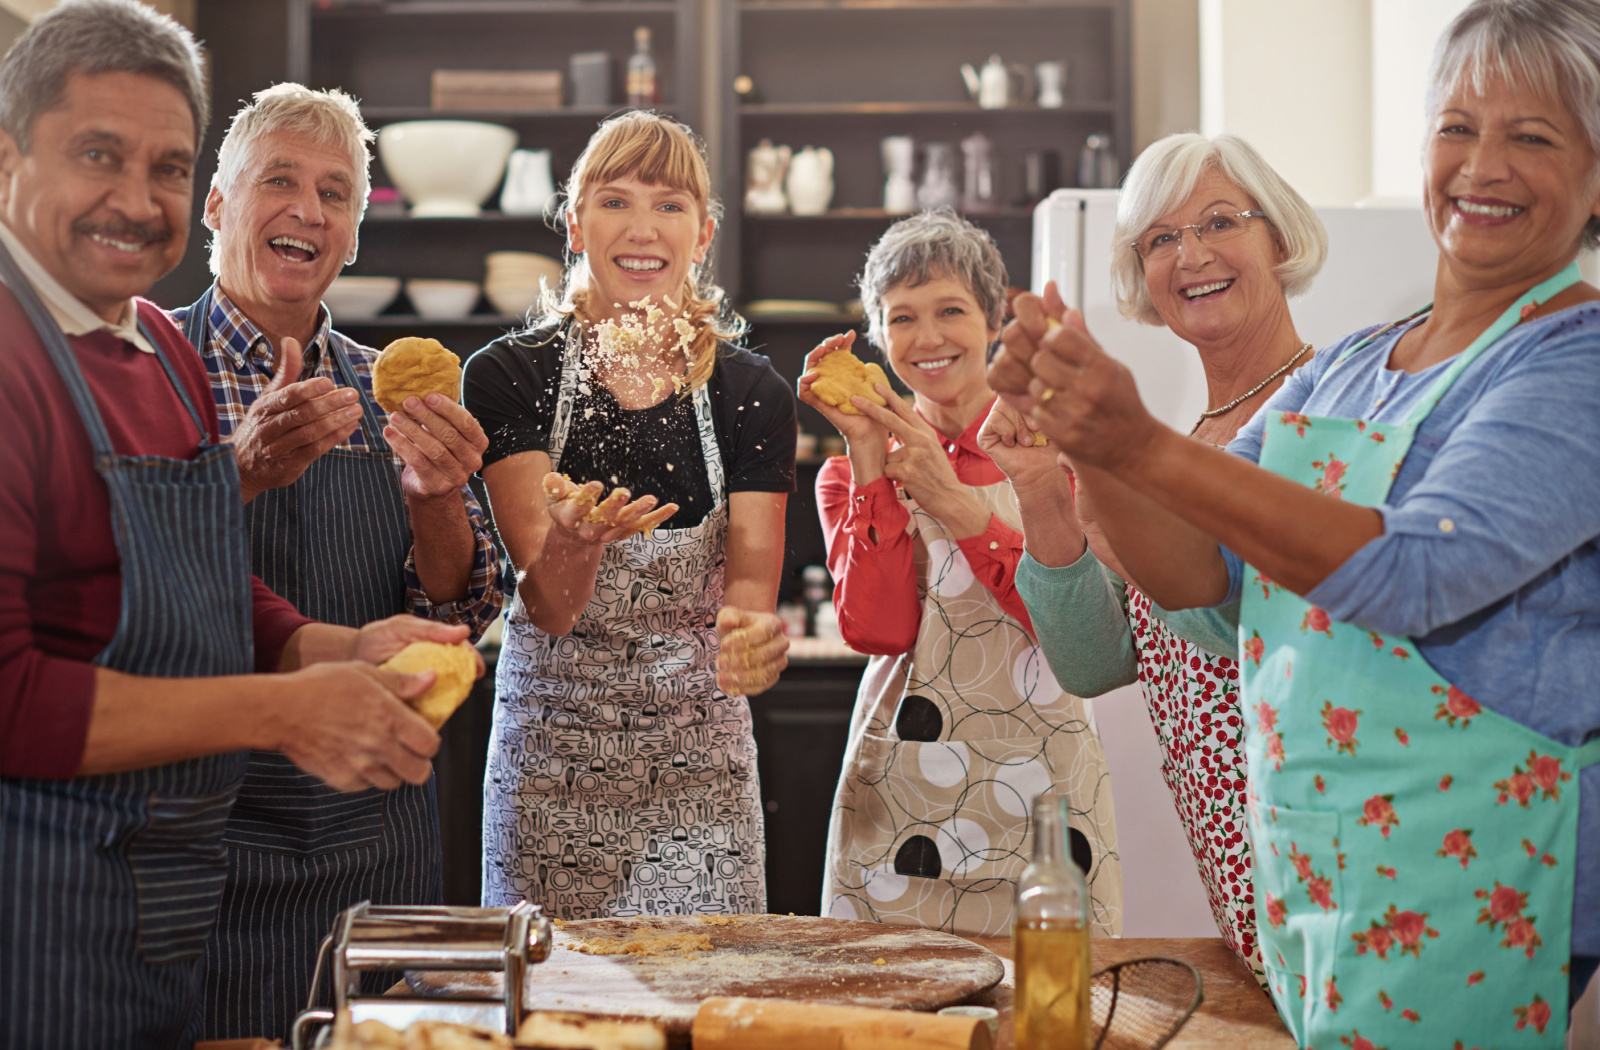 A group of seniors in a baking class with their instructor, each holding dough, smiling and looking directly at the camera.